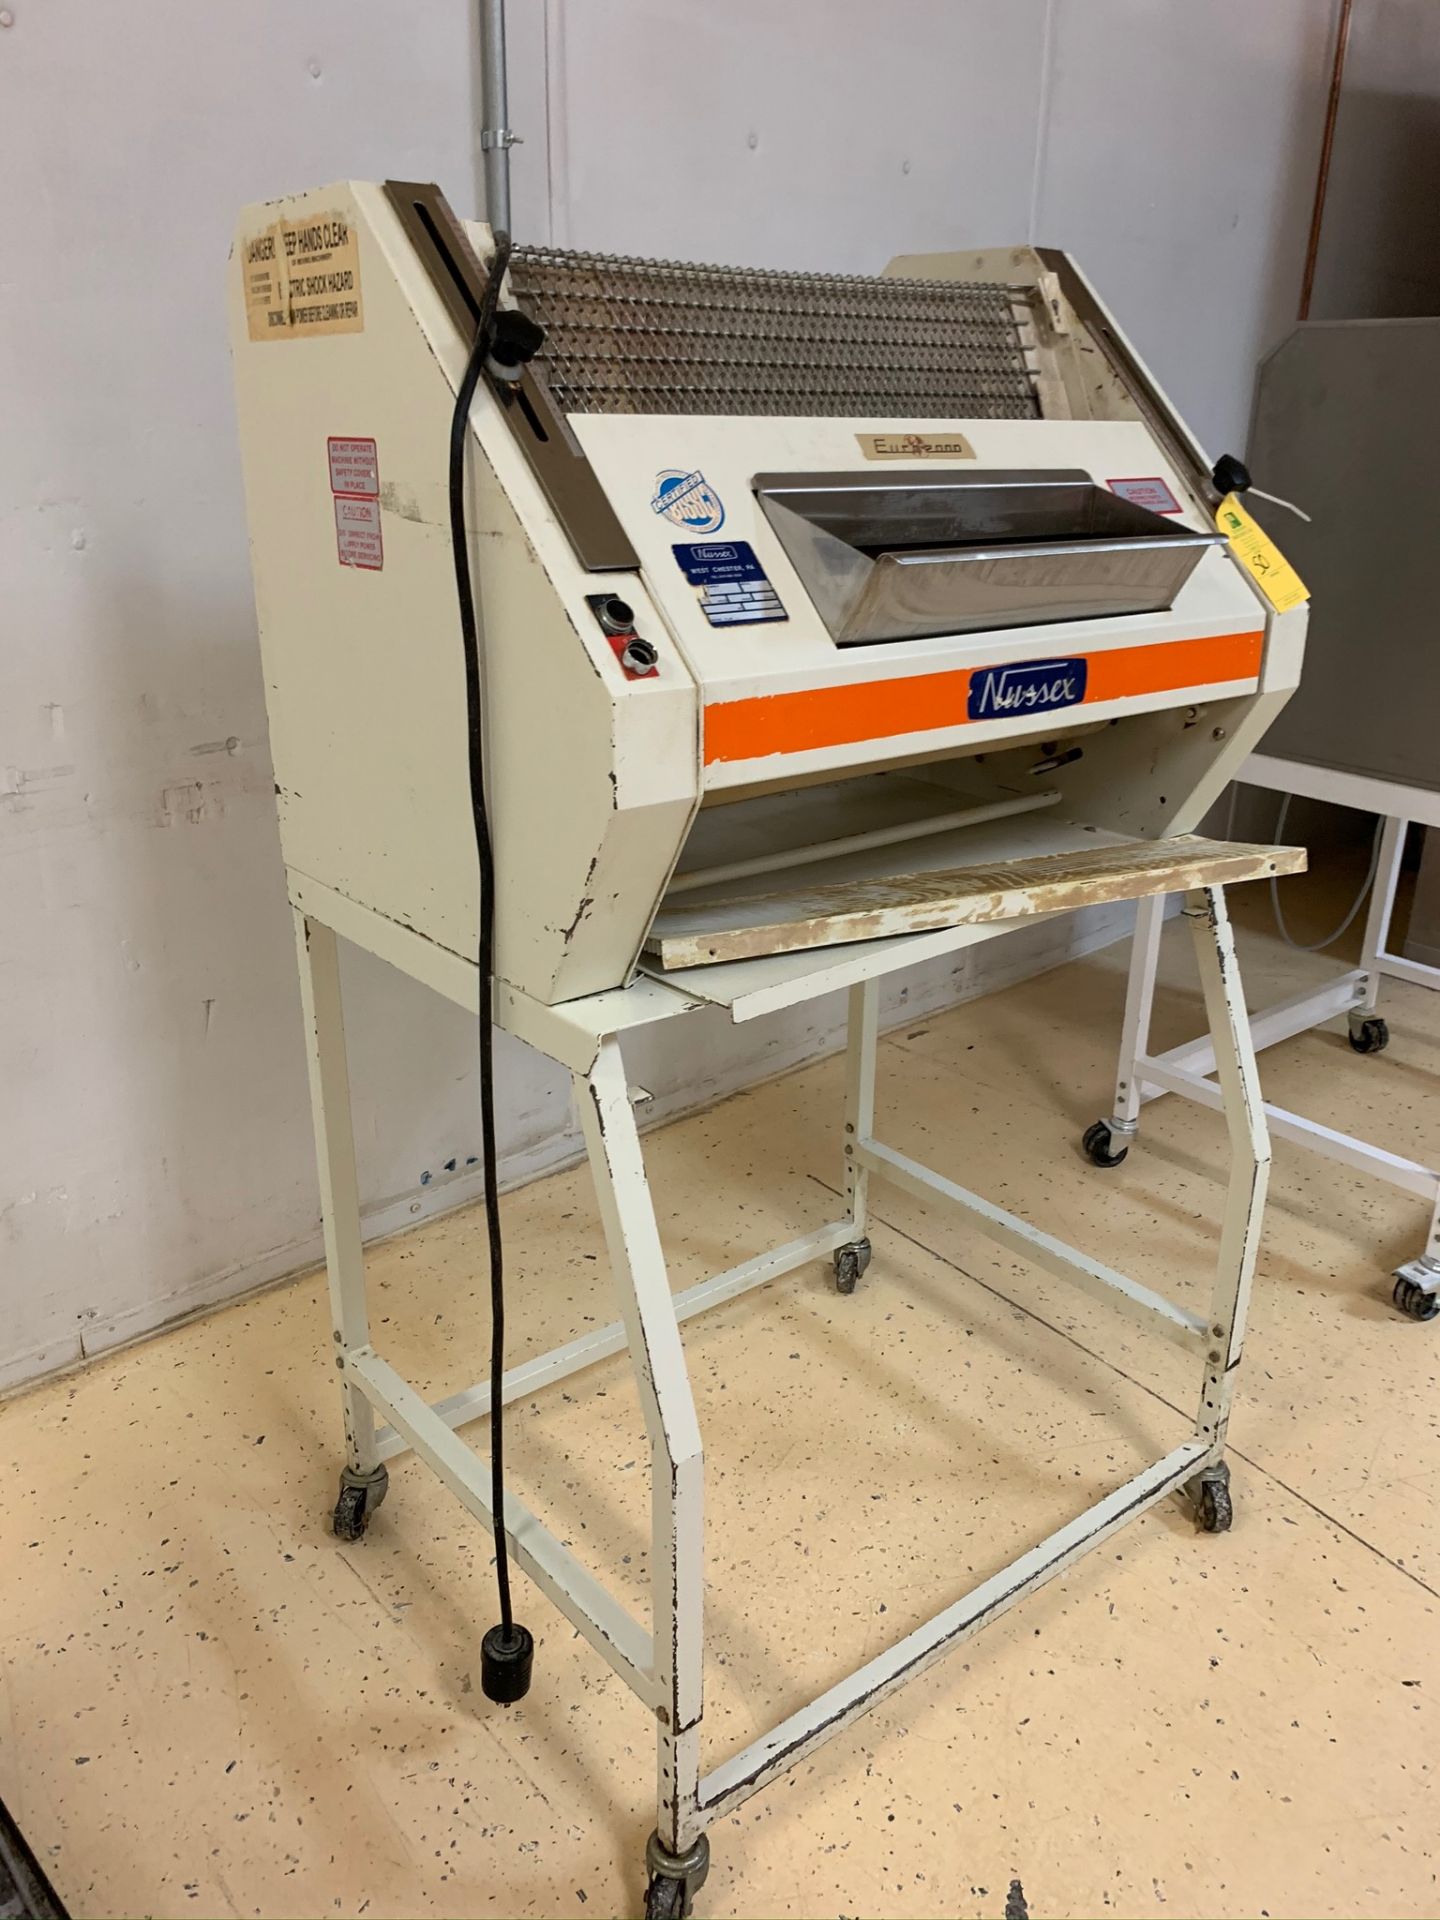 Nussex French Bread Moulder Model Euro-2000 S/N 88 J 523, RIGGING FEE: $50 - Image 2 of 3